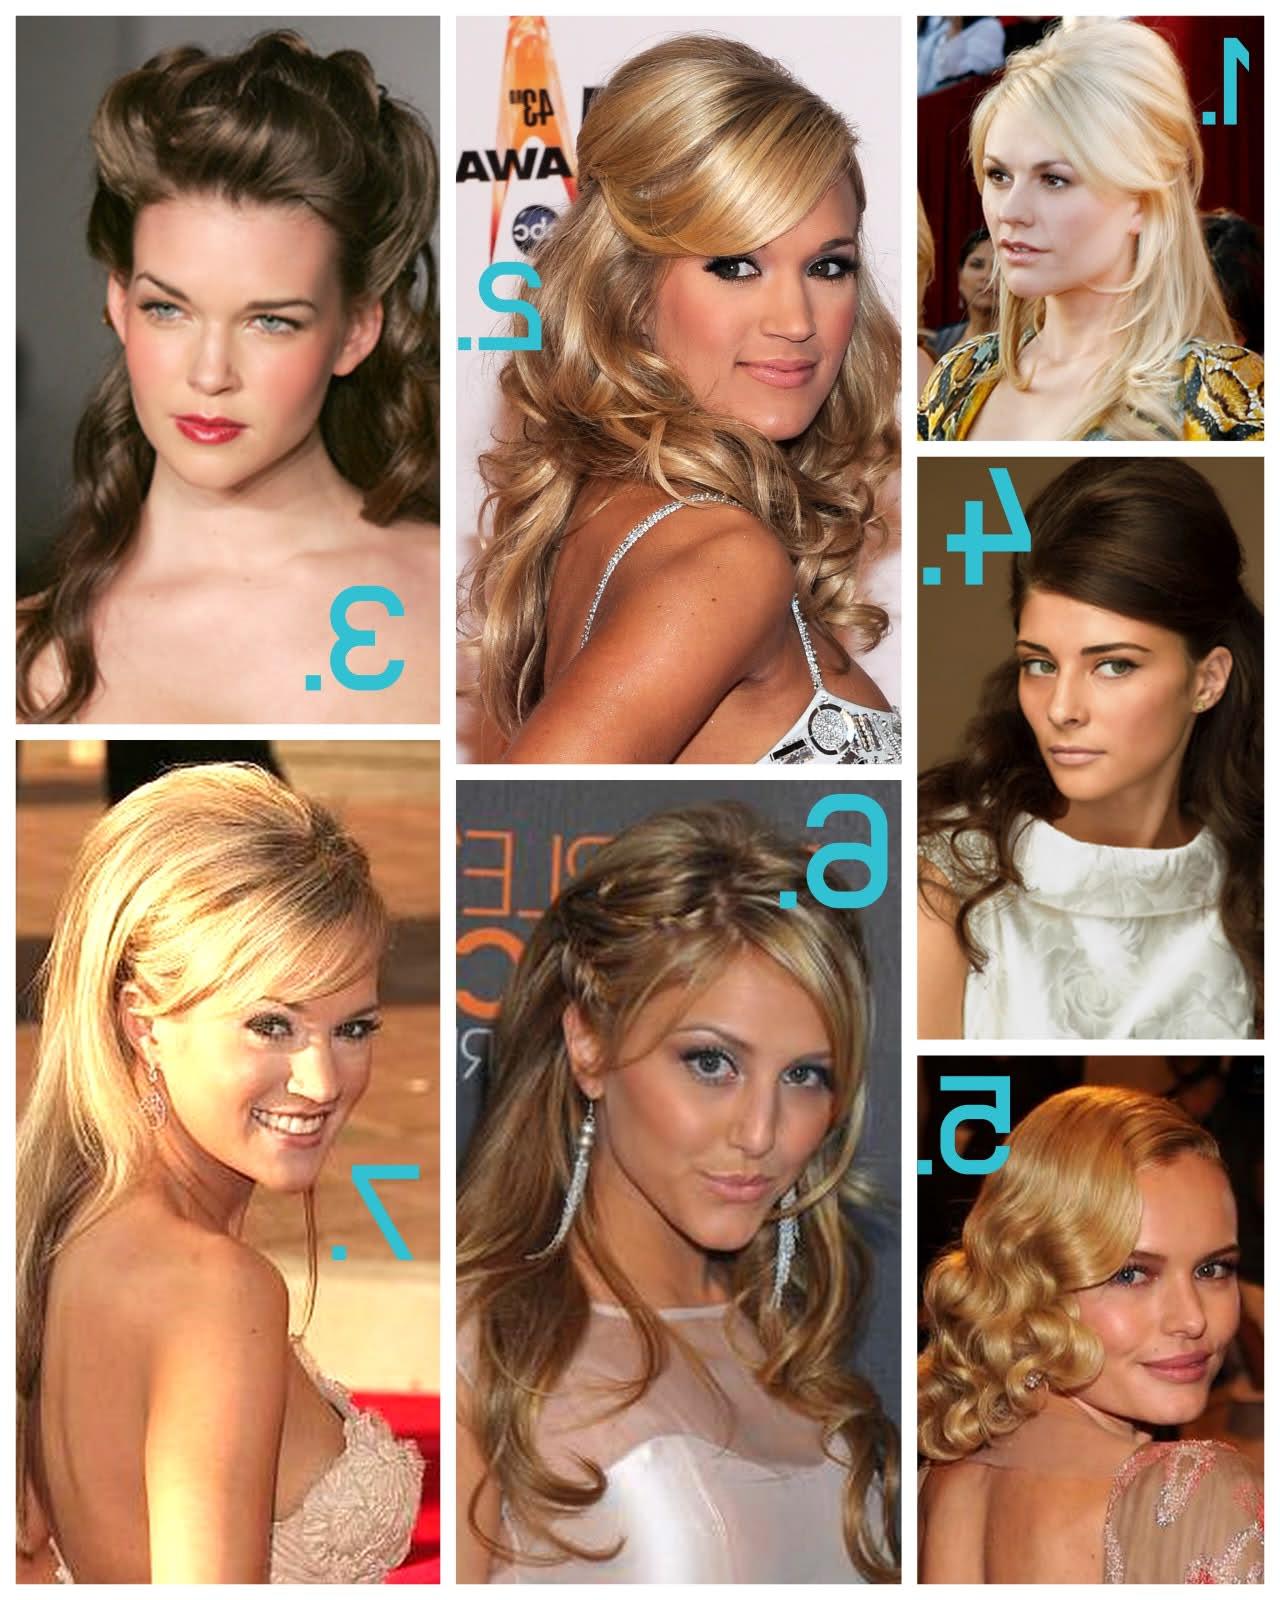 which hairstyle you think